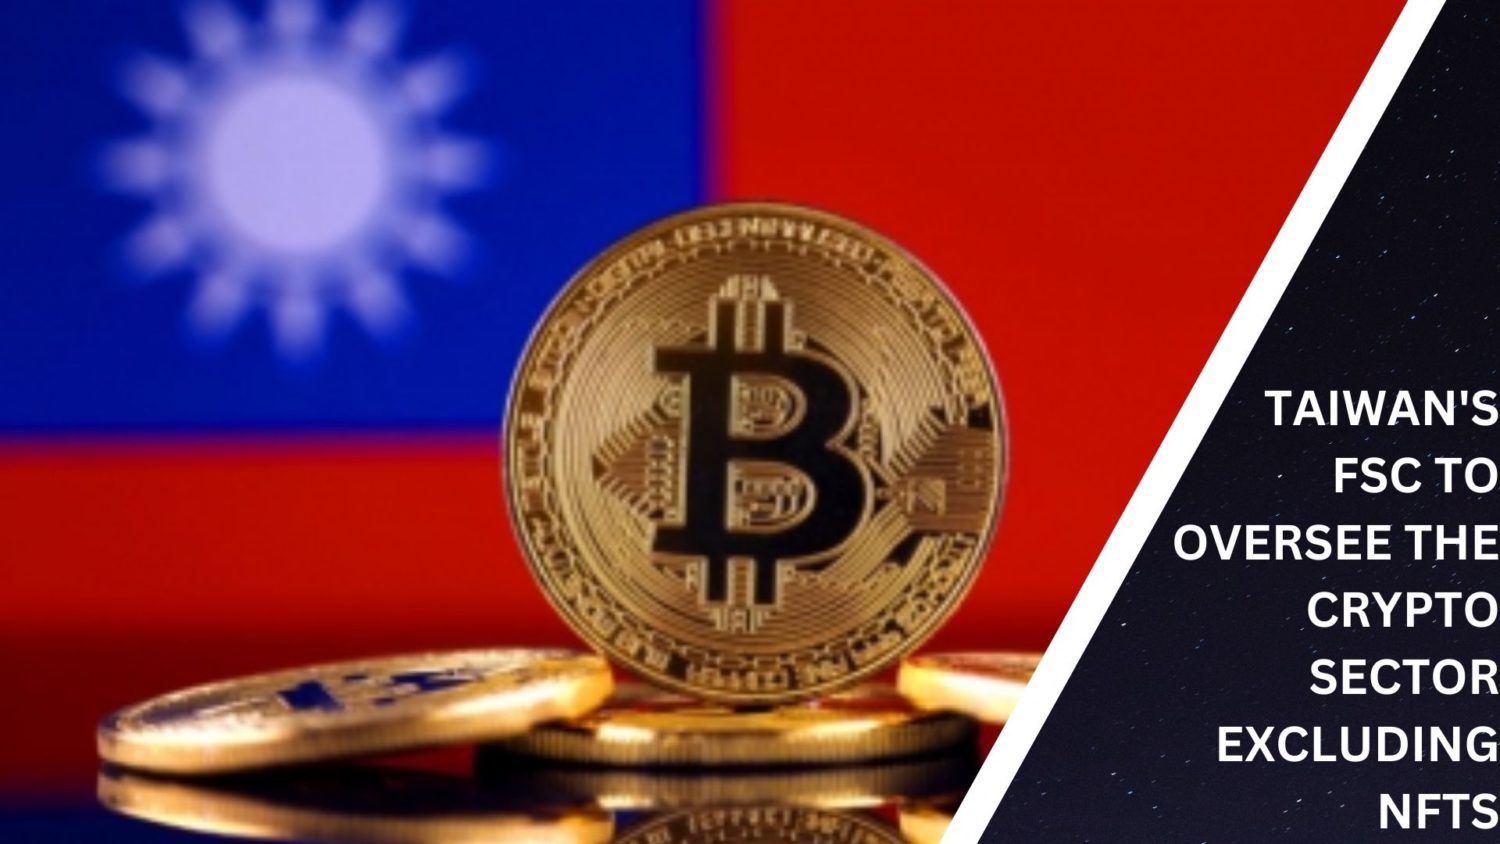 Taiwan'S Fsc To Oversee The Crypto Sector Excluding Nfts